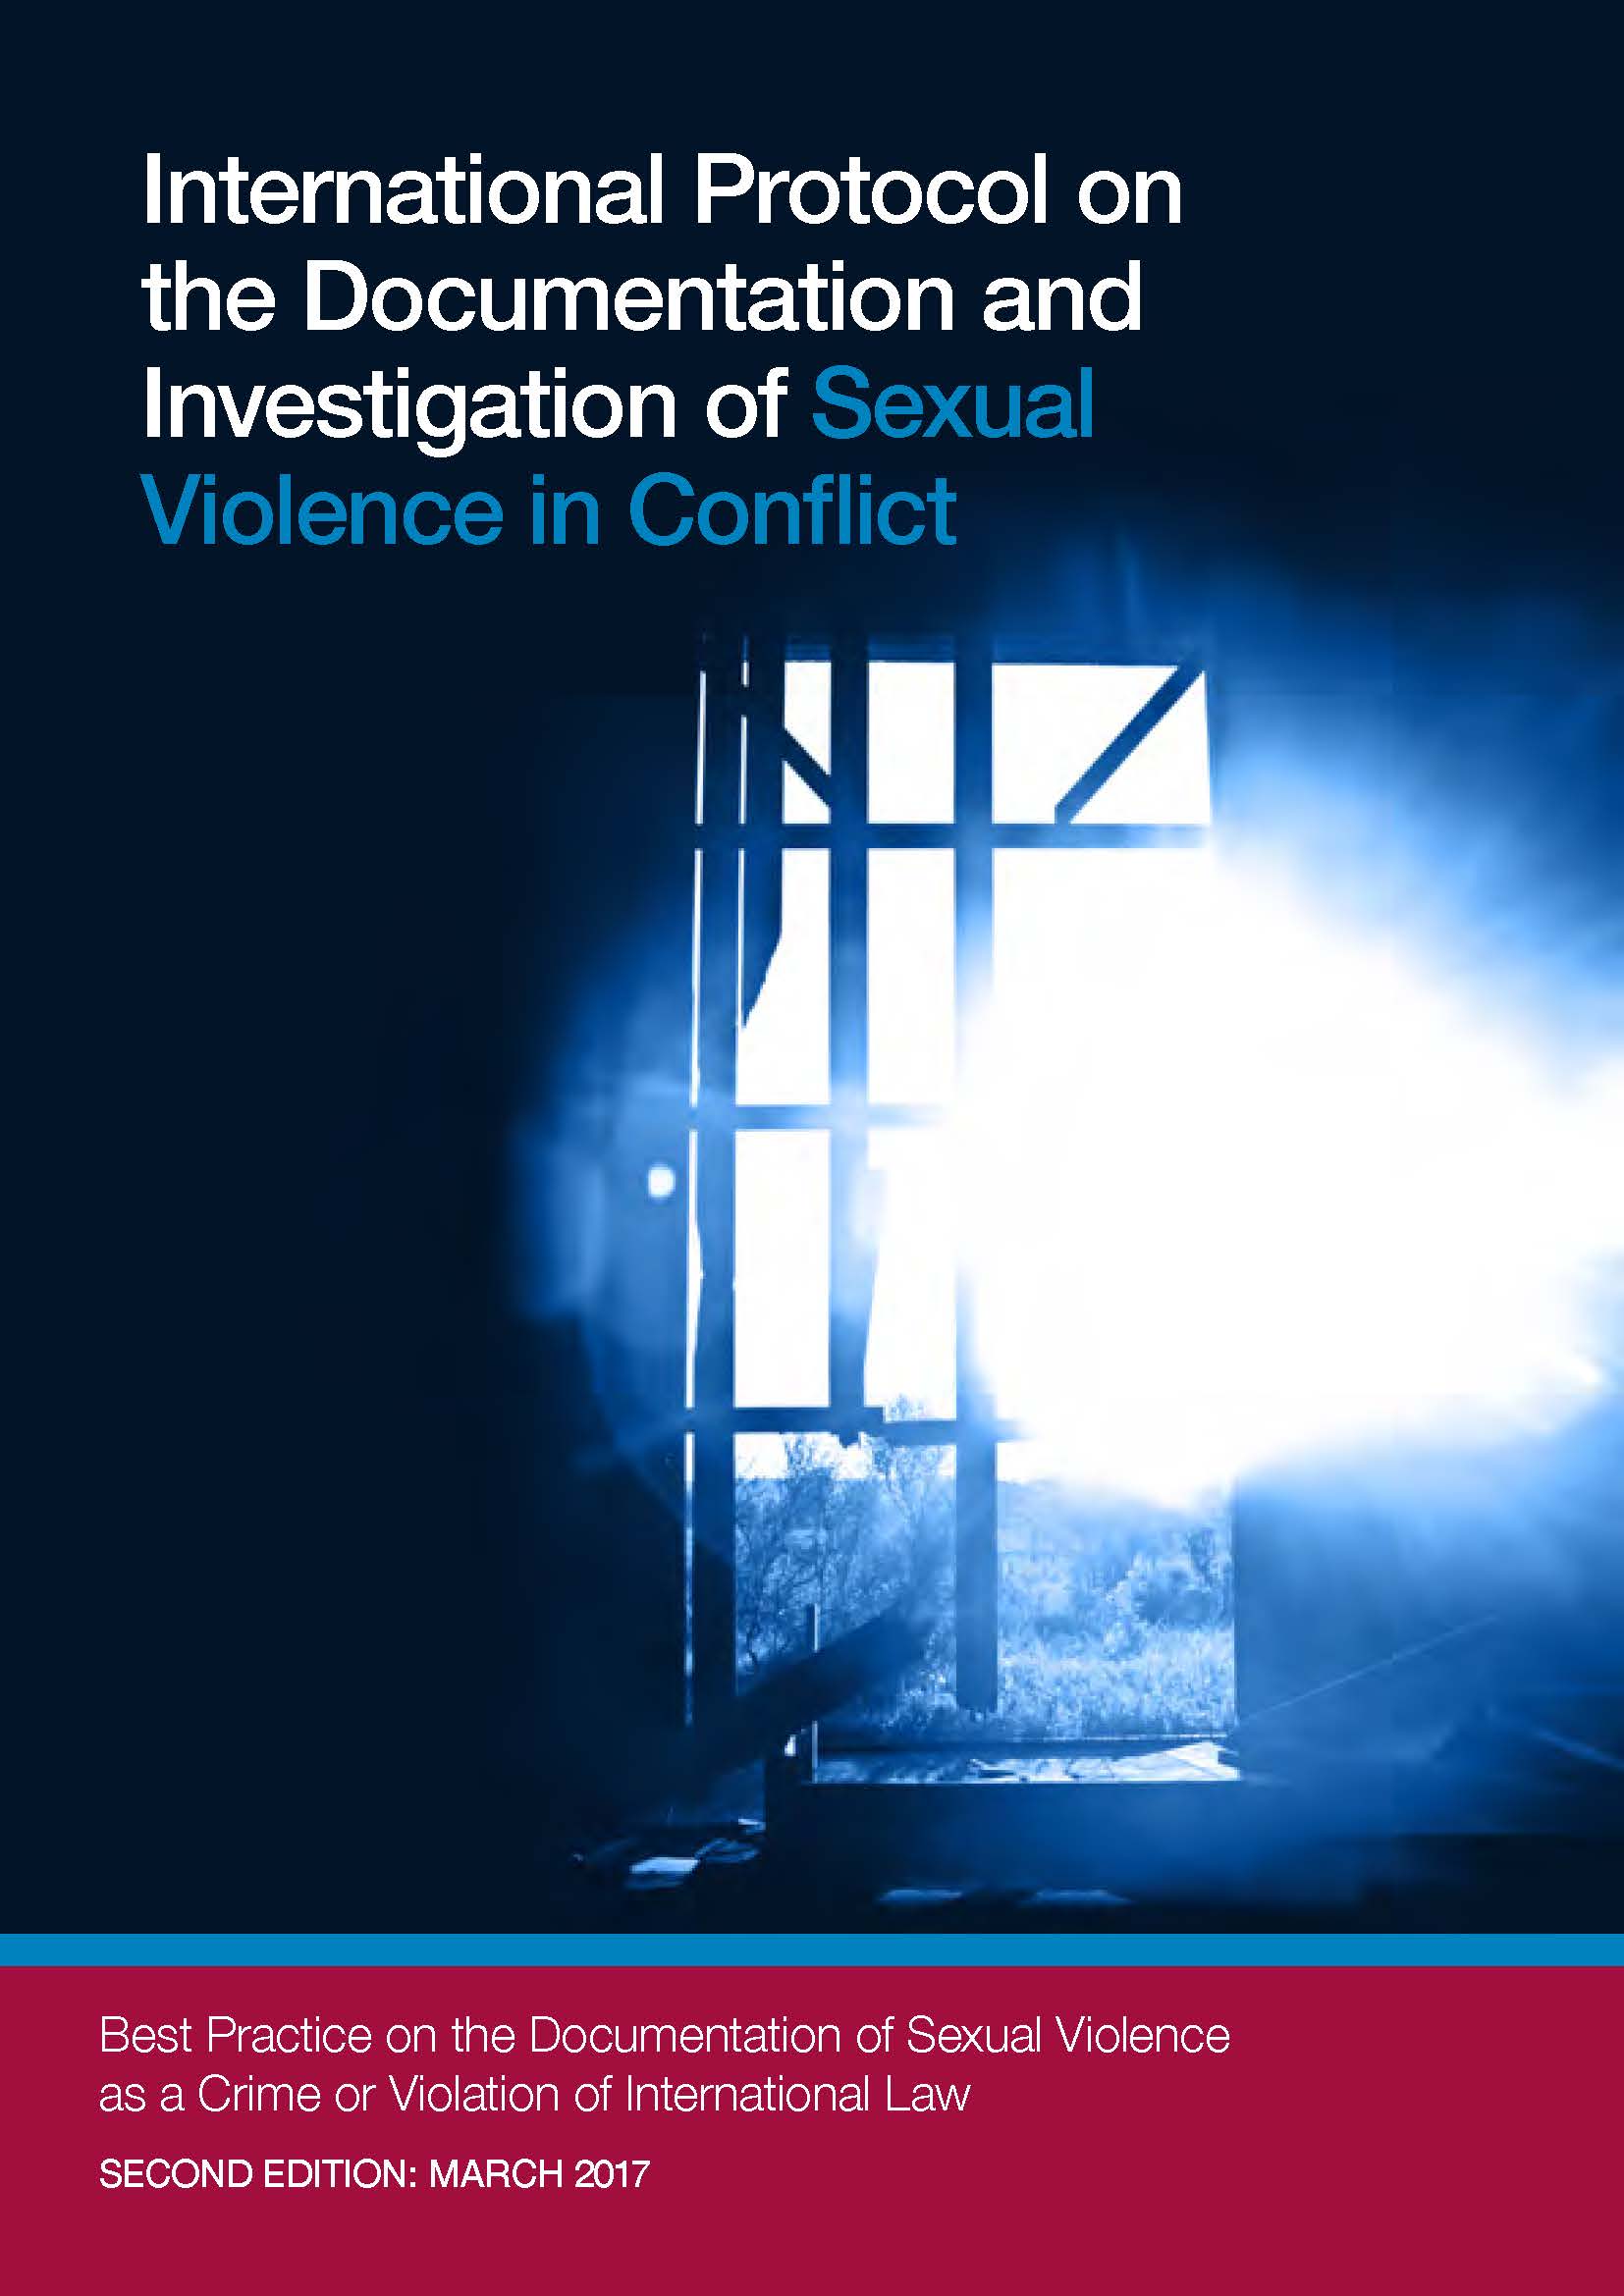 Pages from International Protocol on the Documentation and Investigation of Sexual Violence in Conflict